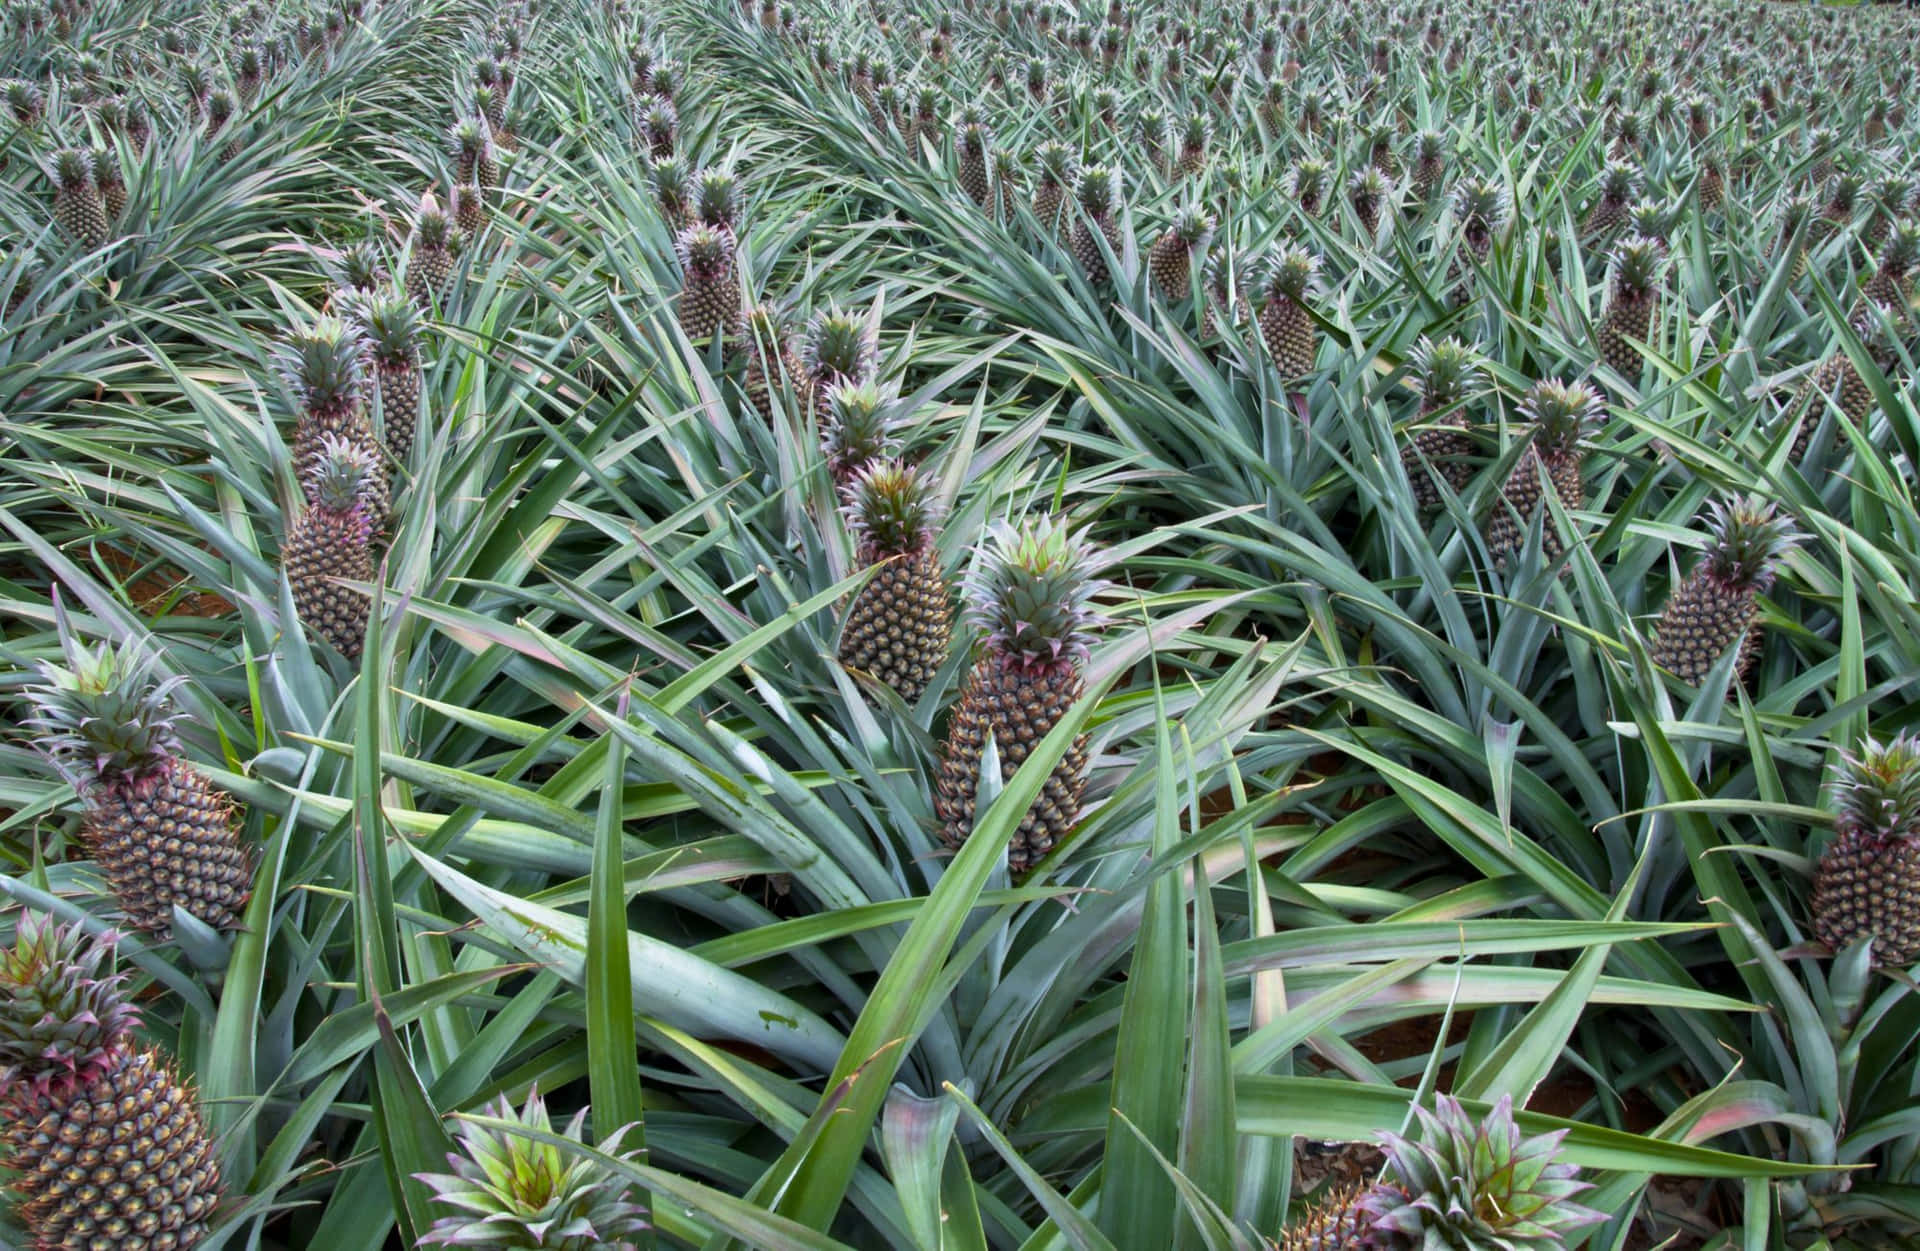 Pineapple Plant Farm Field Photography Picture